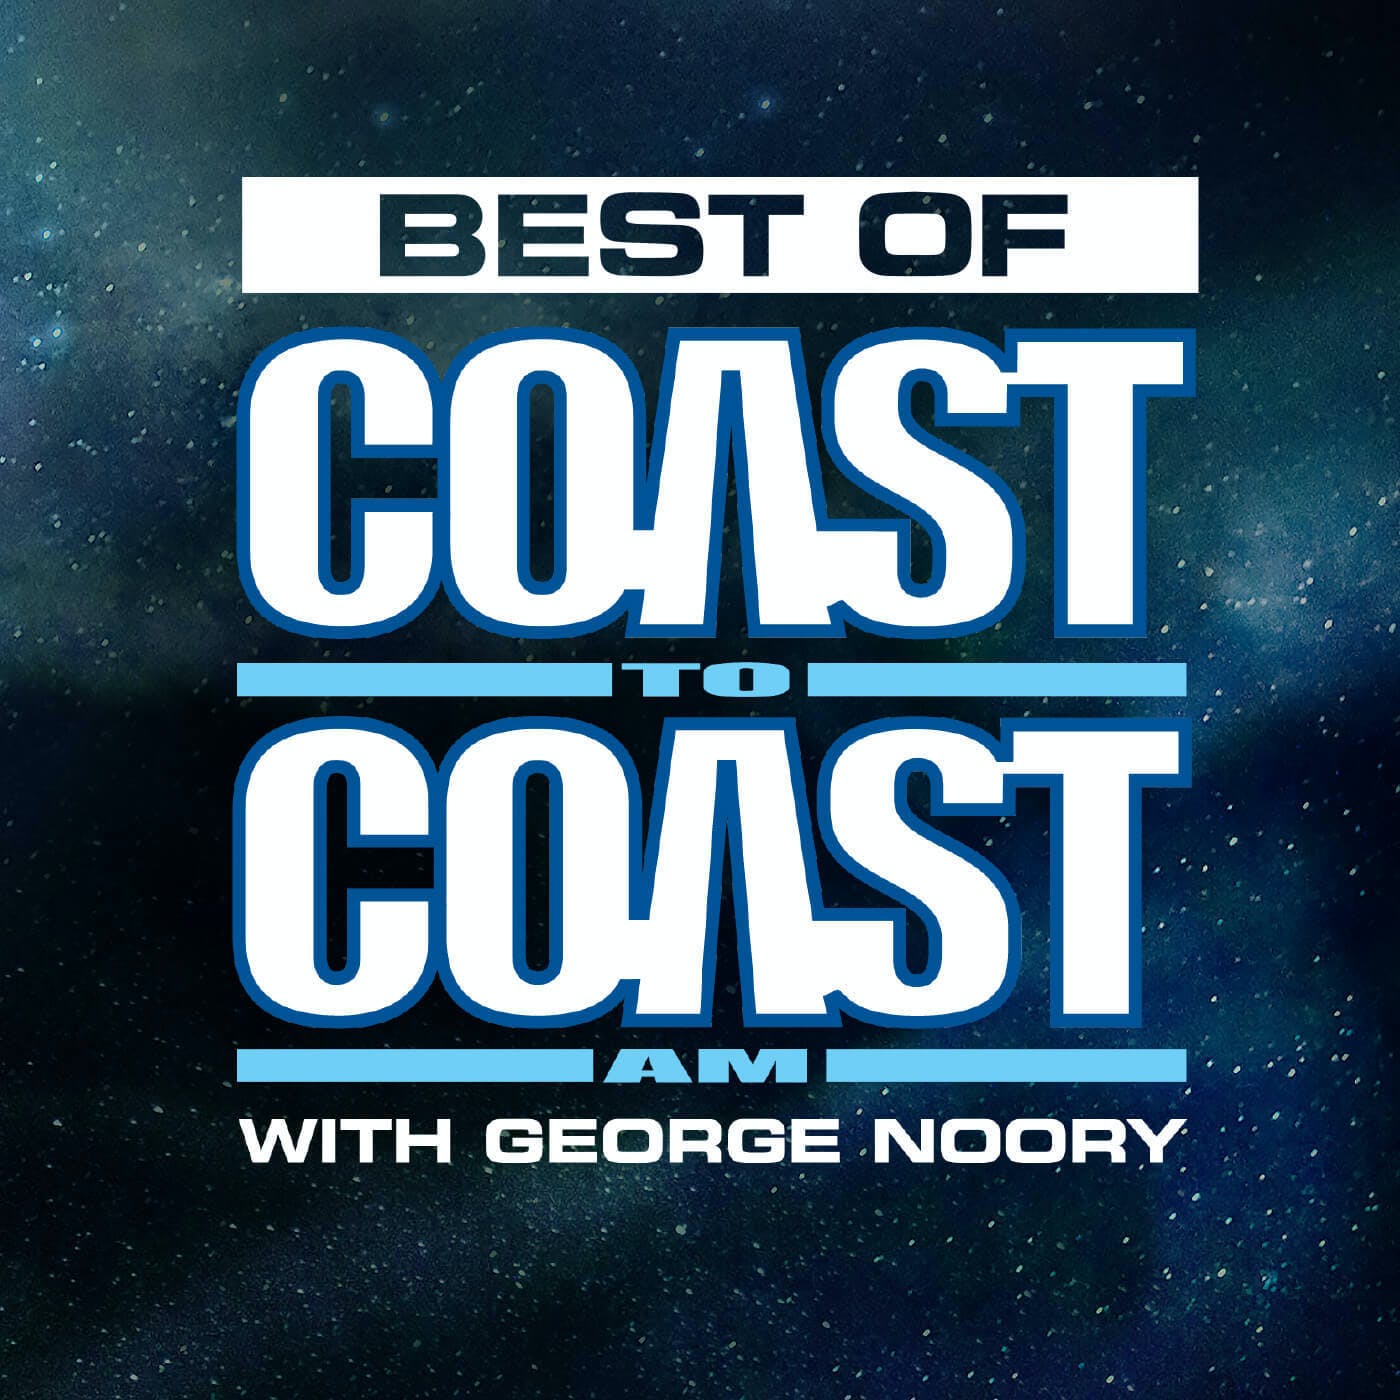 Happiness and Health - Best of Coast to Coast AM - 7/12/22